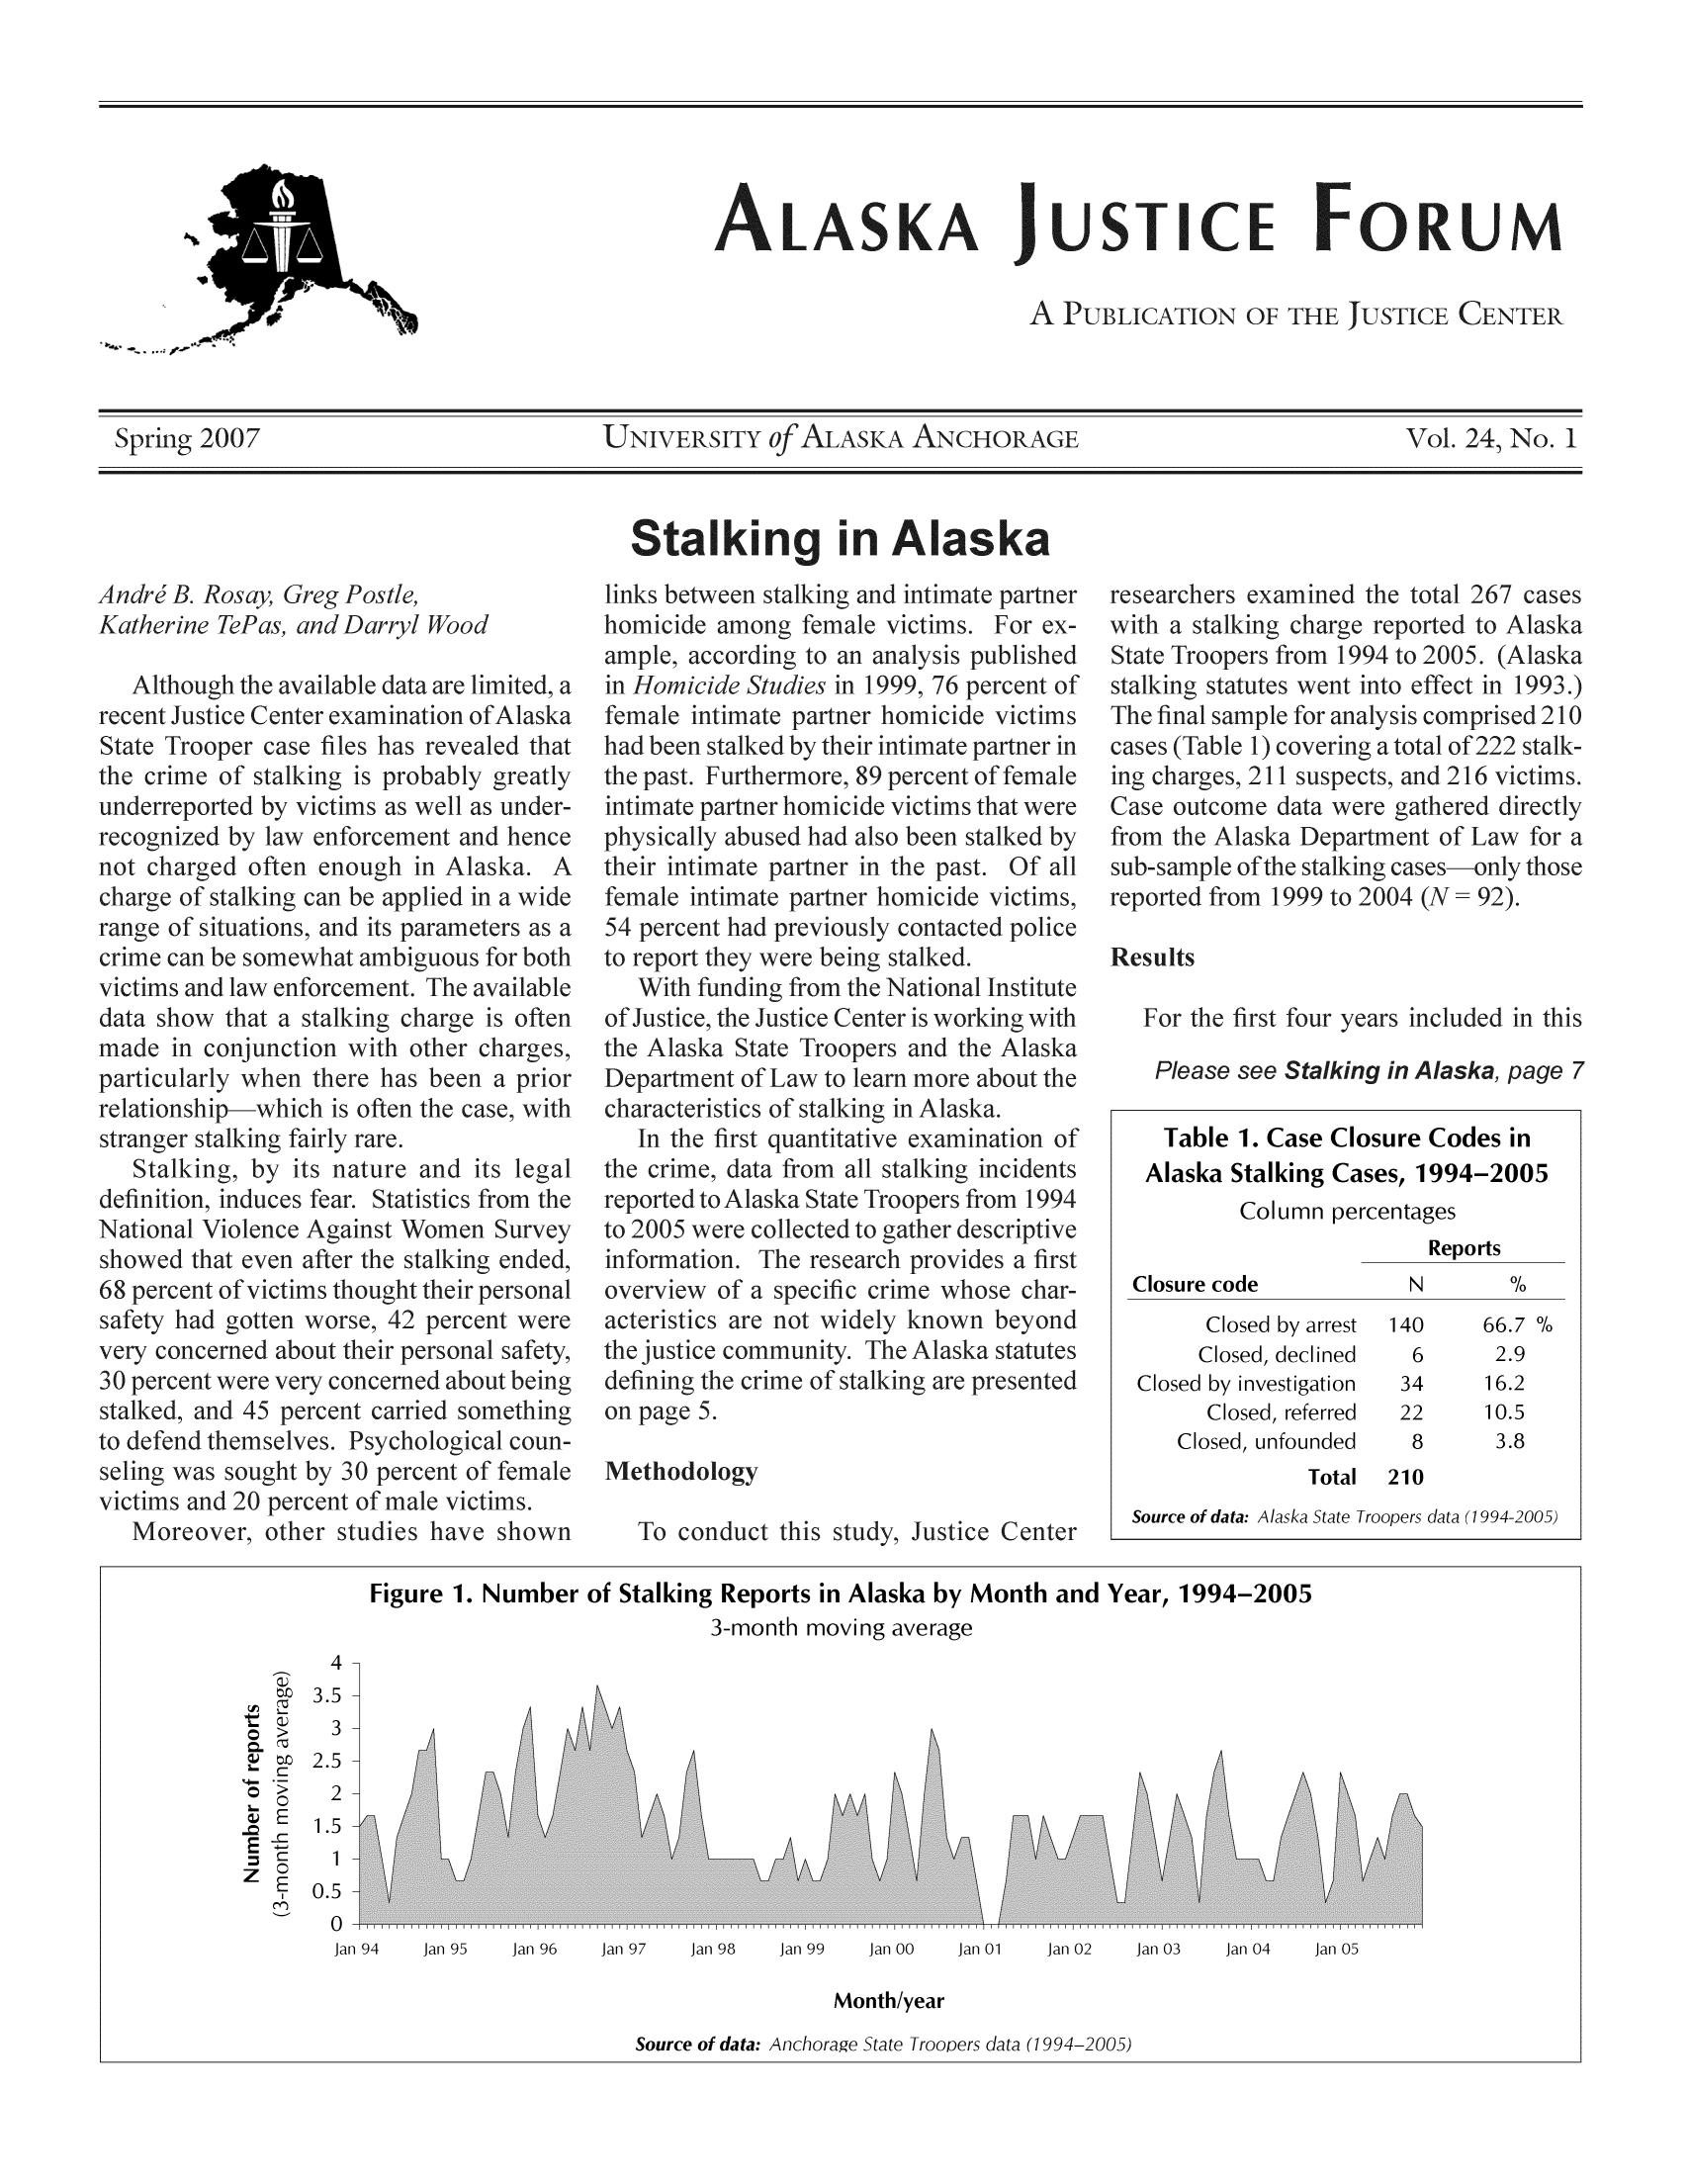 handle is hein.journals/aljufor24 and id is 1 raw text is: ALASKA JUSTICE FORUMaPUBLICATION OF THE JUSTICE CENTERSpring 2007                           UNIVERSITY ofALASKAANCHORAGE                                   Vol. 24, No.Stalking in AlaskaAndre B. Rosa)y, Greg Pestle,          links between stalking and intimate partner  researchers examined the total 267 caseKatherine TePas, andDarryl Wood         homicide among female victims. For ex-  with a stalking charge reported to Alaskample, according to an analysis published  State Troopers from 1994 to 2005. (AlaskAlthough the available data are limited, a  in Homicide Studies in 1999, 76 percent of  stalking statutes went into effect in 1993.1recent Justice Center examination of Alaska  female intimate partner homicide victims  The final sample for analysis comprised 2State Trooper case files has revealed that  had been stalked by their intimate partner in  cases (Table 1) covering a total of 222 stalkthe crime of stalking is probably greatly  the past. Furthermore, 89 percent of female  ing charges, 211 suspects, and 216 victiunderreported by victims as well as under-  intimate partner homicide victims that were  Case outcome data were gathered direclyrecognized by law enforcement and hence  physically abused had also been stalked by  from the Alaska Department of Law fornot charged often enough in Alaska. A   their intimate partner in the past. Of all  sub-sample ofrthestalking cases-onlythocharge of stalking can be applied in a wide  female intimate partner homicide victims,  reported from 1999 to 2004 (N = 92).range of situations, and its parameters as a  54 percent had previously contacted policecrime can be somewhat ambiguous for both  to report they were being stalked.    Resultsvictims and law enforcement. The available  With funding from the National Institutedata show that a stalking charge is often  of Justice, the Justice Center is working with  For the first four years included in thfmade  in  conjunction  with  other  charges,  the Alaska  State  Troopers and  the AlaskaPla es eS lkn inA  s ap gparticularly when there has been a prior  Department of Law to learn more about the   eaes    SaininAsape;relationship-which is often the case, with  characteristics of stalking in Alaska.stranger stalking fairly rare.            In the first quantitative examination of  Table 1. Case Closure Codes inStalking, by its nature and its legal  the crime, data from all stalking incidents  Alaska Stalking Cases, 1994-2005definition, induces fear. Statistics from the  reported to Alaska State Troopers from 1994  Column percentagesNational Violence Against Women Survey  to 2005 were collected to gather descriptiveReportsshowed that even after the stalking ended,  information. The research provides a firstReot68 percent of victims thought their personal  overview of a specific crime whose char-  Closure code   N       %safety had gotten worse, 42 percent were  acteristics are not widely known beyond      Closed by arrest 140  66.7 %very concerned about their personal safety,  the justice community. The Alaska statutes  Closed, declined  6  2.930 percent were very concerned about being  defining the crime of stalking are presented  Closed by investigation  34  16.2stalked, and 45 percent carried something  on page 5.                                  Closed, referred  22  10.5to defend themselves. Psychological coun-                                            Closed, unfounded  8     3.8seling was sought by 30 percent of female  Methodology                                         Total 210victims and 20 percent of male victims.                                          Source of data: Alaska State Troopers data (1994-2005)Moreover, other studies have shown      To conduct this study, Justice CenterFigure 1. Number of Stalking Reports in Alaska by Month and Year, 1994-20053-month moving average4-¢)a  3.5x_.    3 -,.    2.5 -2-= ~ ._ 1.5--Jan 94  Jan 95  Jan 96  Jan 97  Jan 98  Jan 99  Jan 00  Jan 01  Jan 02  Jan 03  Jan 04  Jan 05Month/yearSource of data: Anchorage State Troooers data (1994-2005)